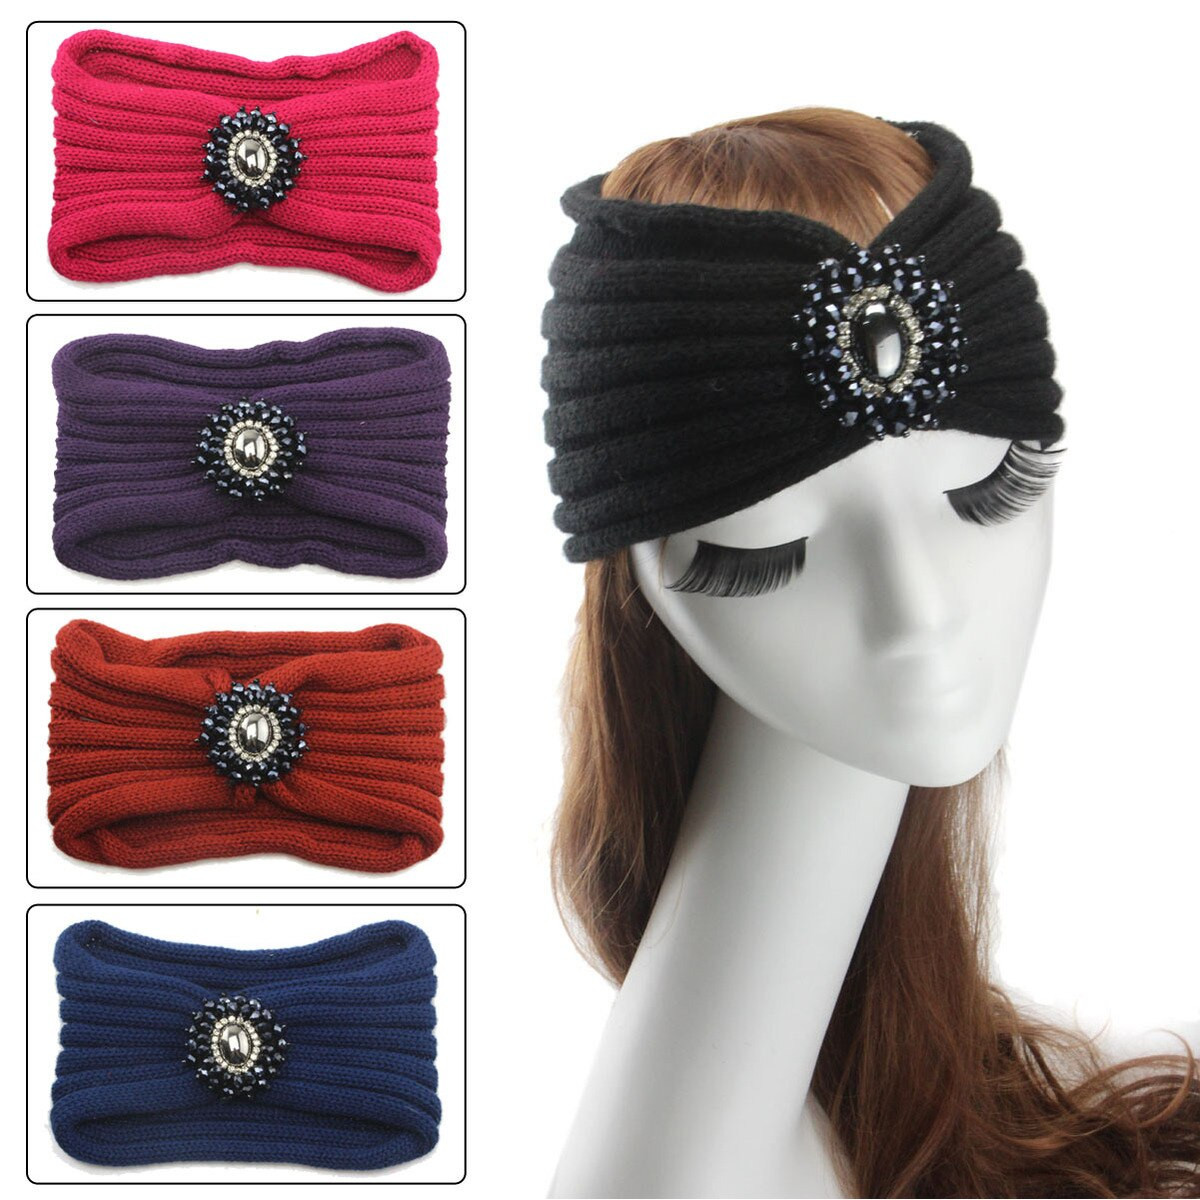 Fall Gifts For Her
 Rhinestone Knit Headband Gift for her Women s Fall Winter